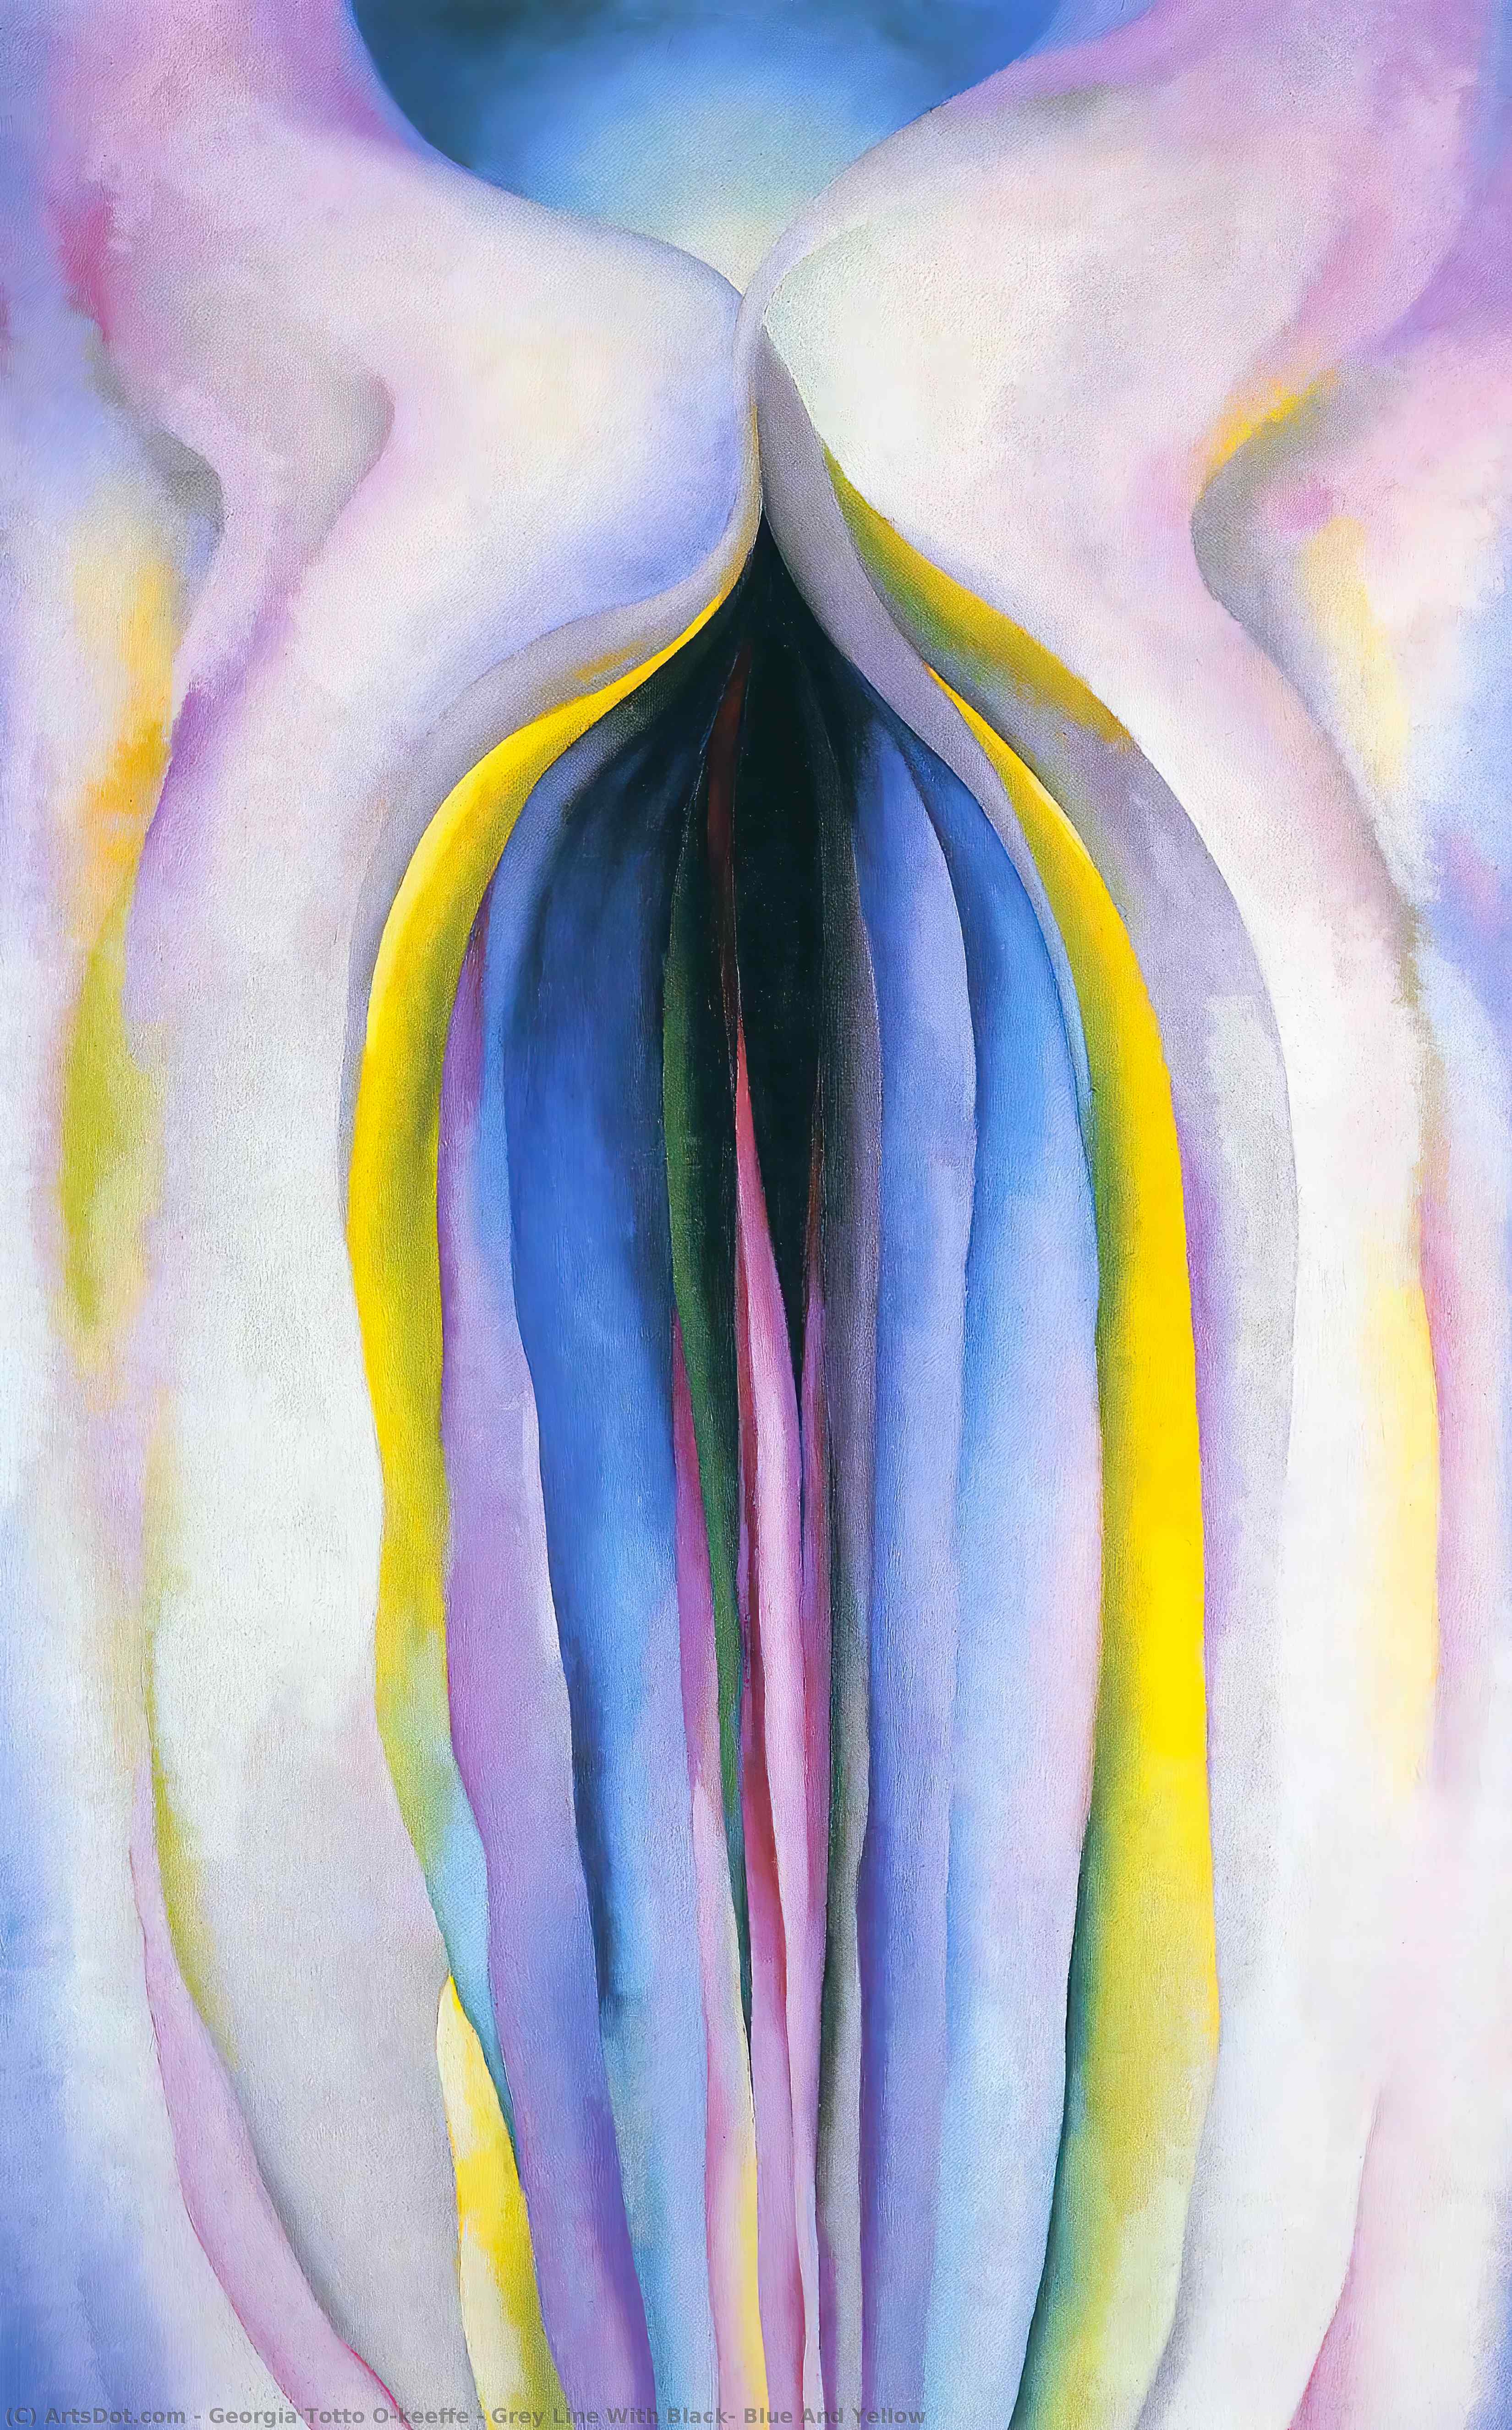 WikiOO.org - Encyclopedia of Fine Arts - Maleri, Artwork Georgia Totto O'keeffe - Grey Line With Black, Blue And Yellow